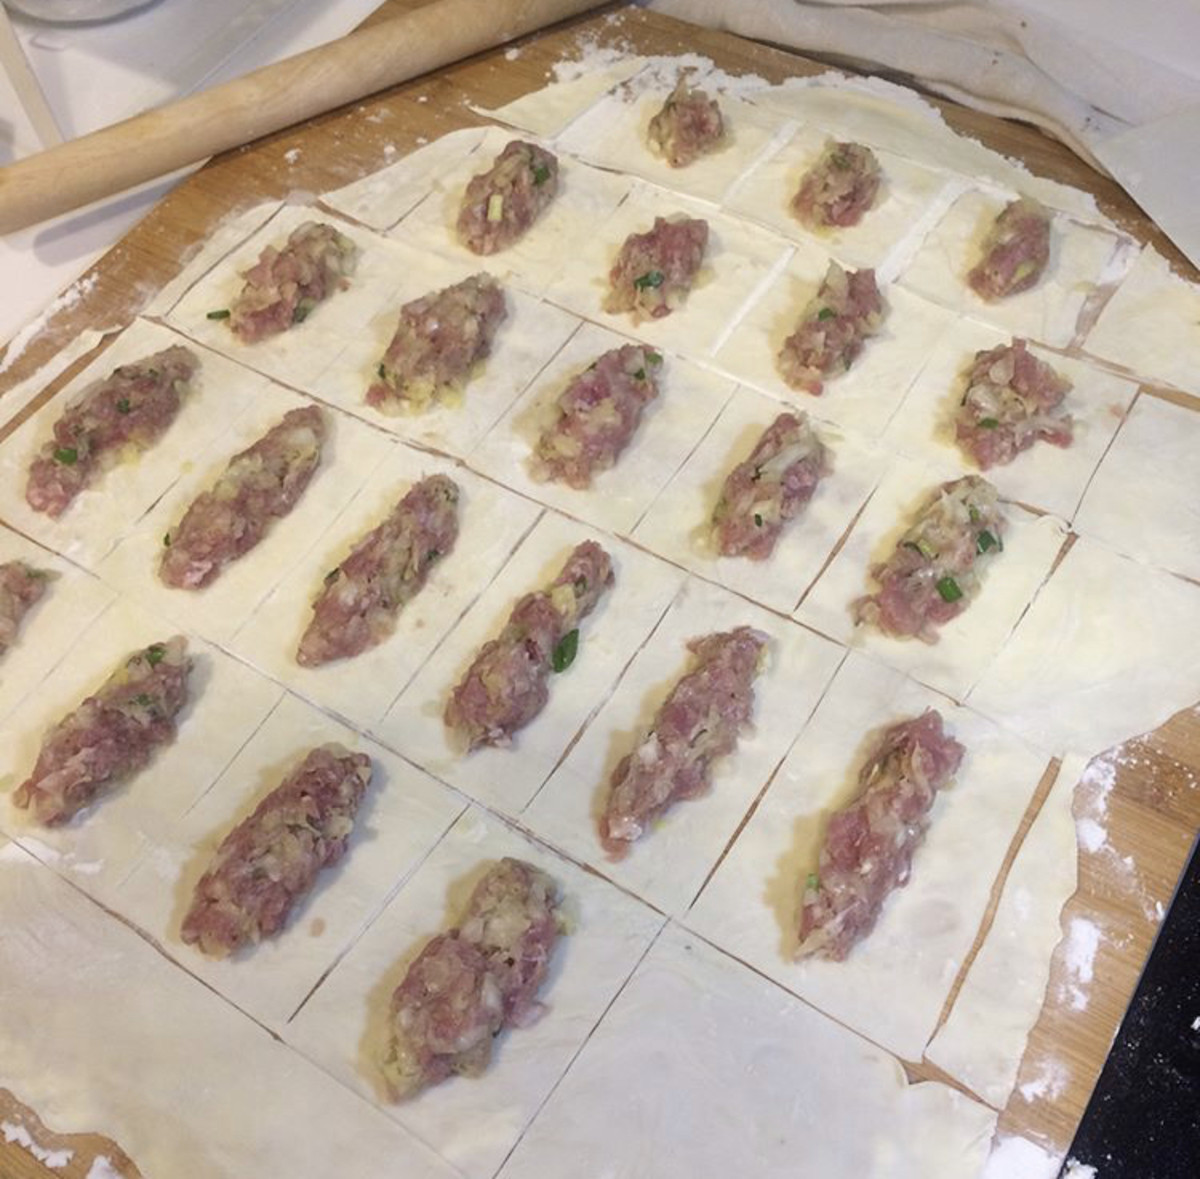 Use an assembly line to make potstickers efficiently.